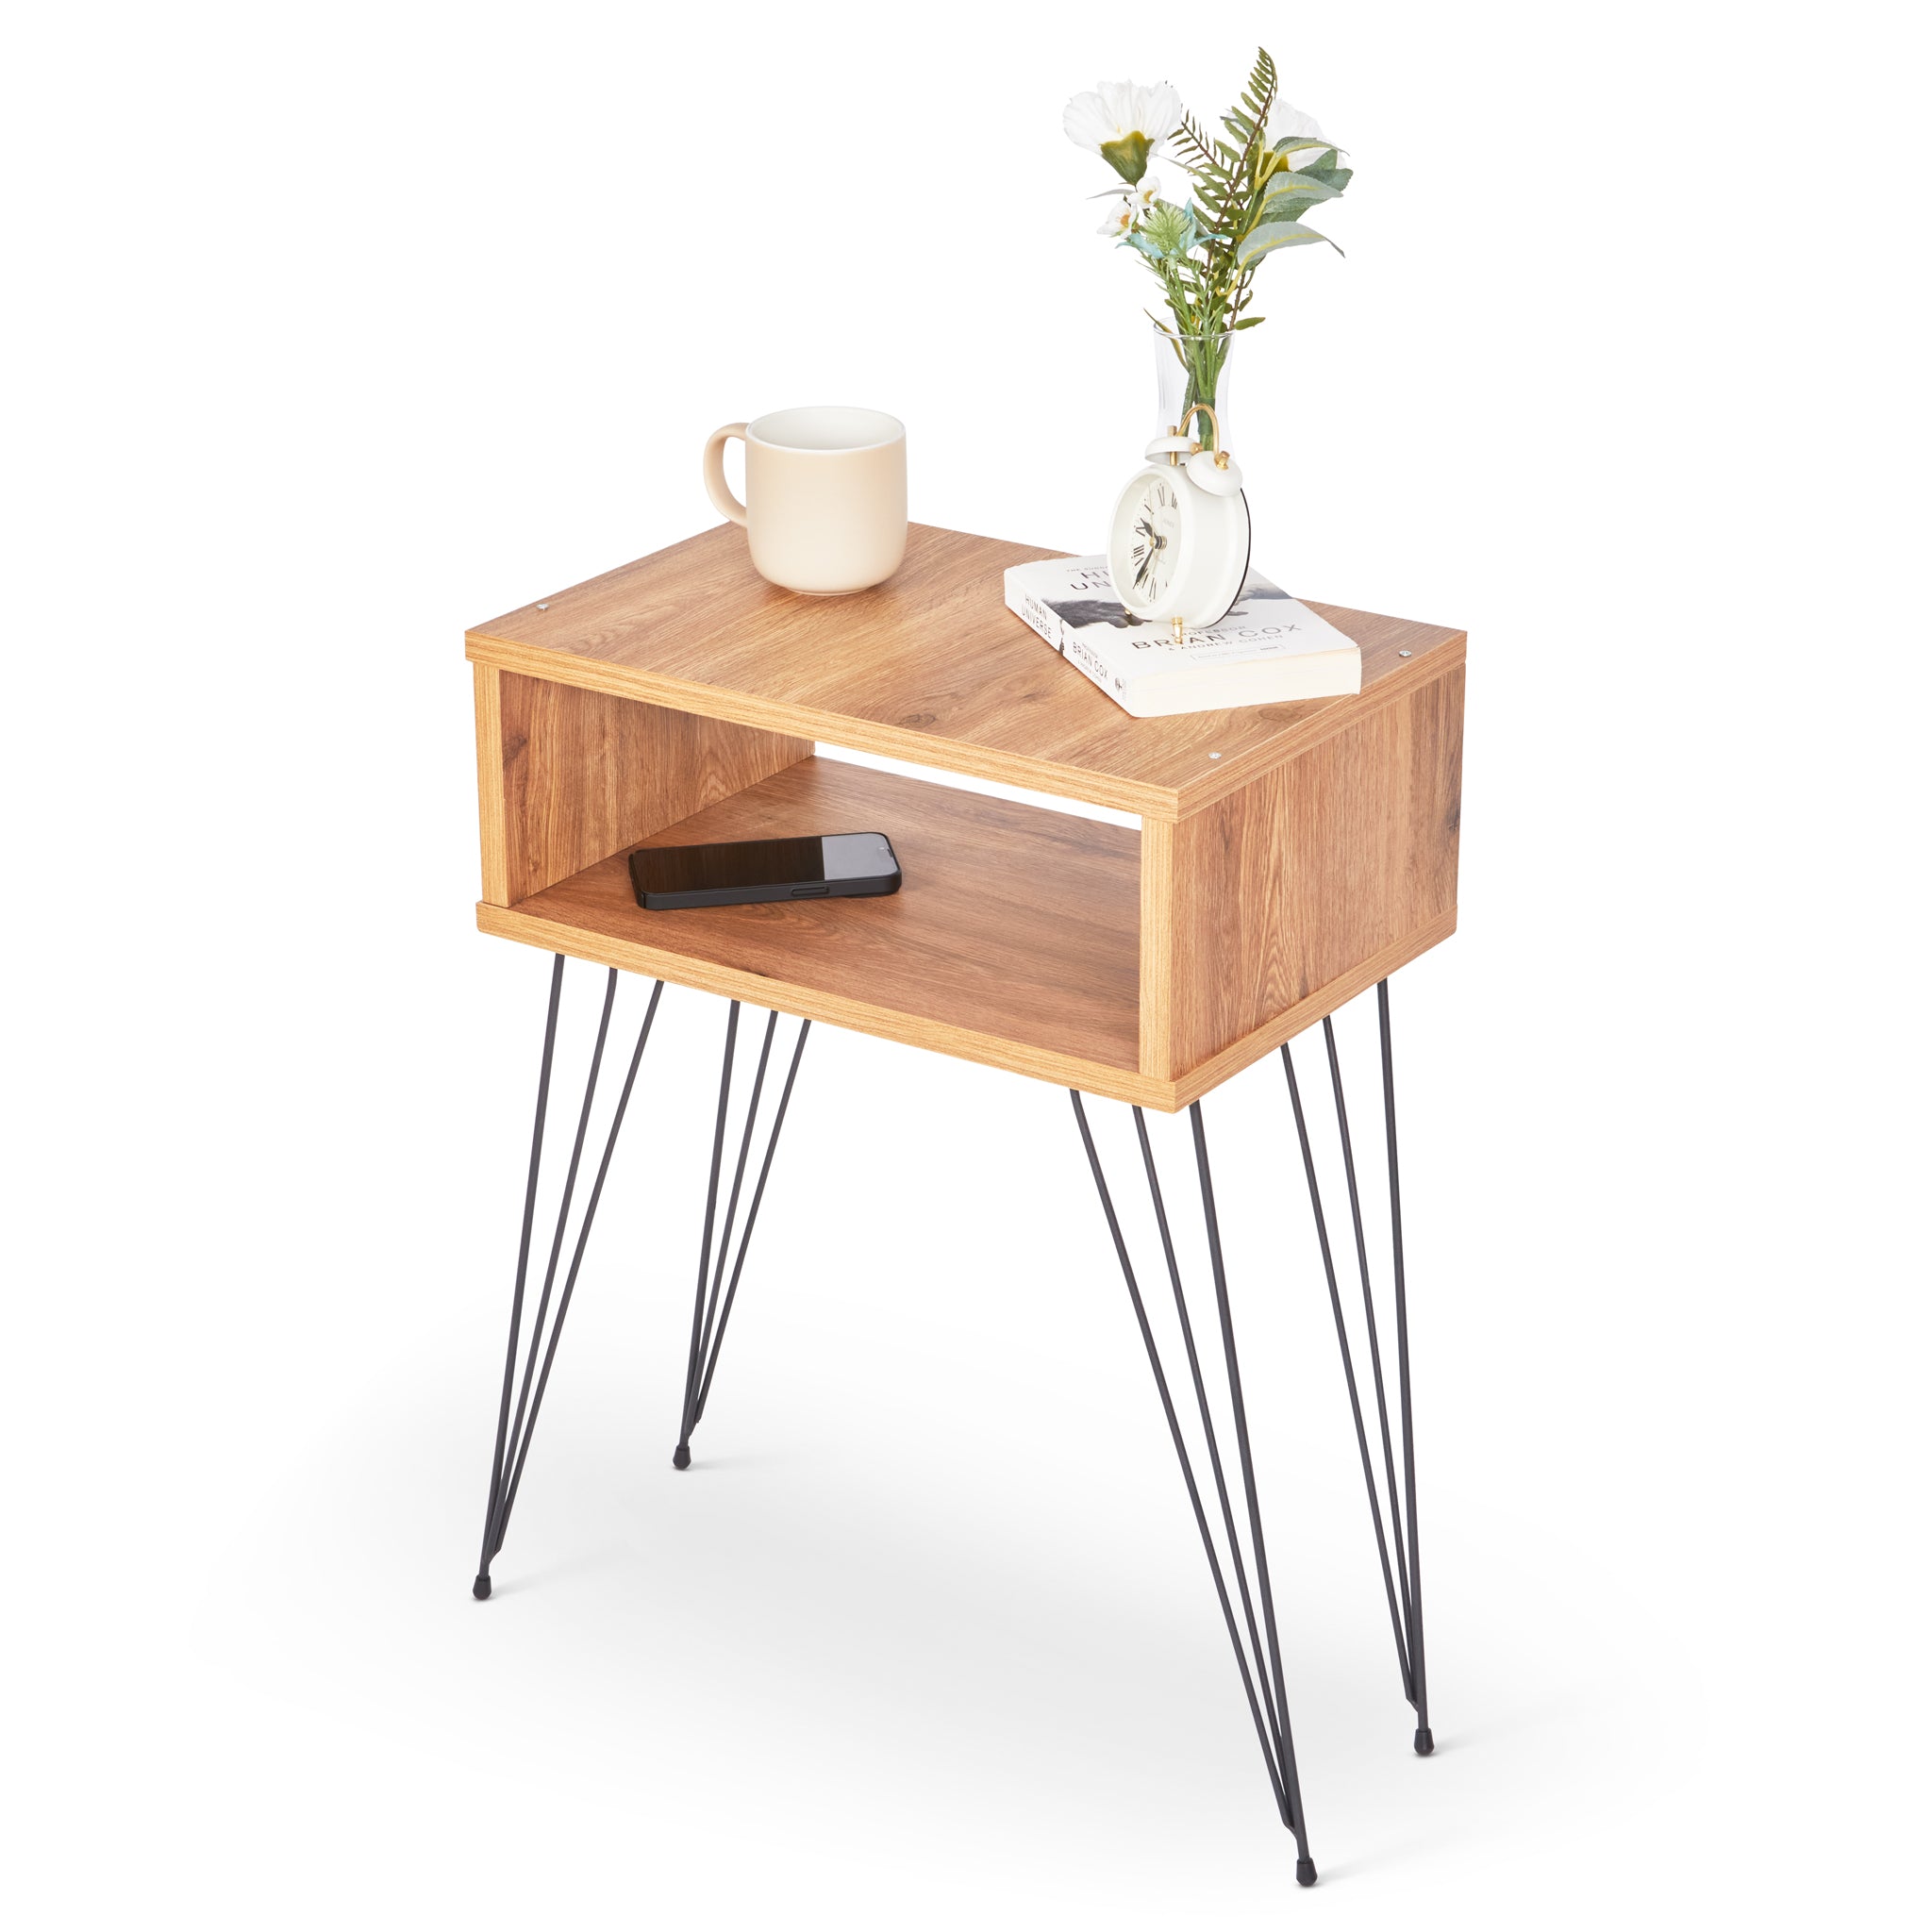 Retro Style Bedside Table With Hairpin Legs - Atlantic Pine